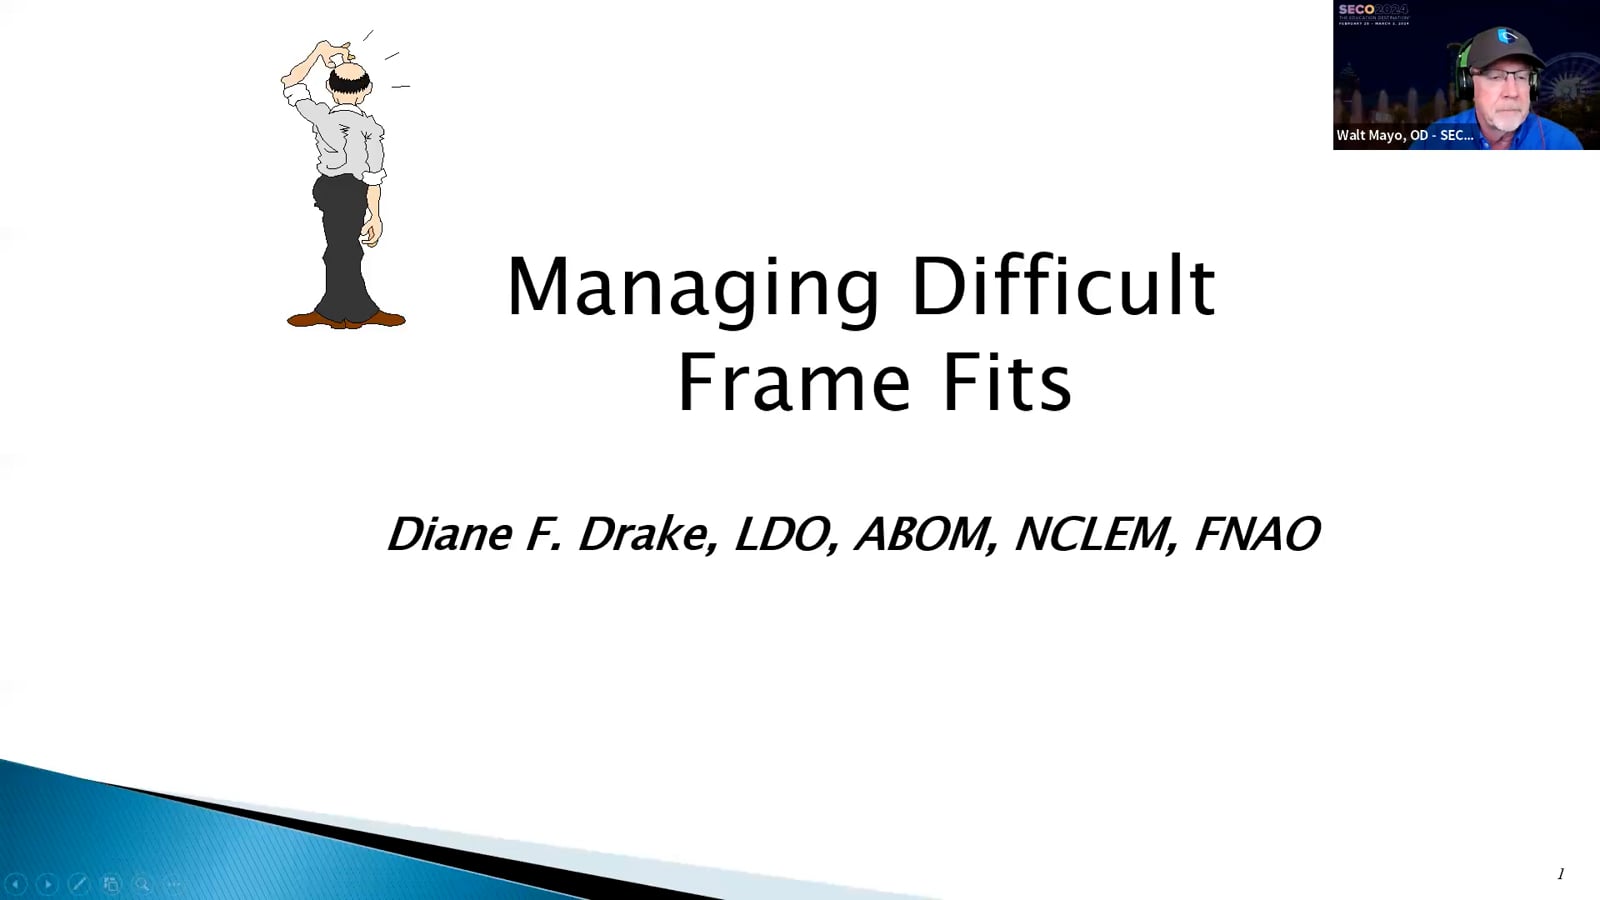 Managing Difficult Frame Fits